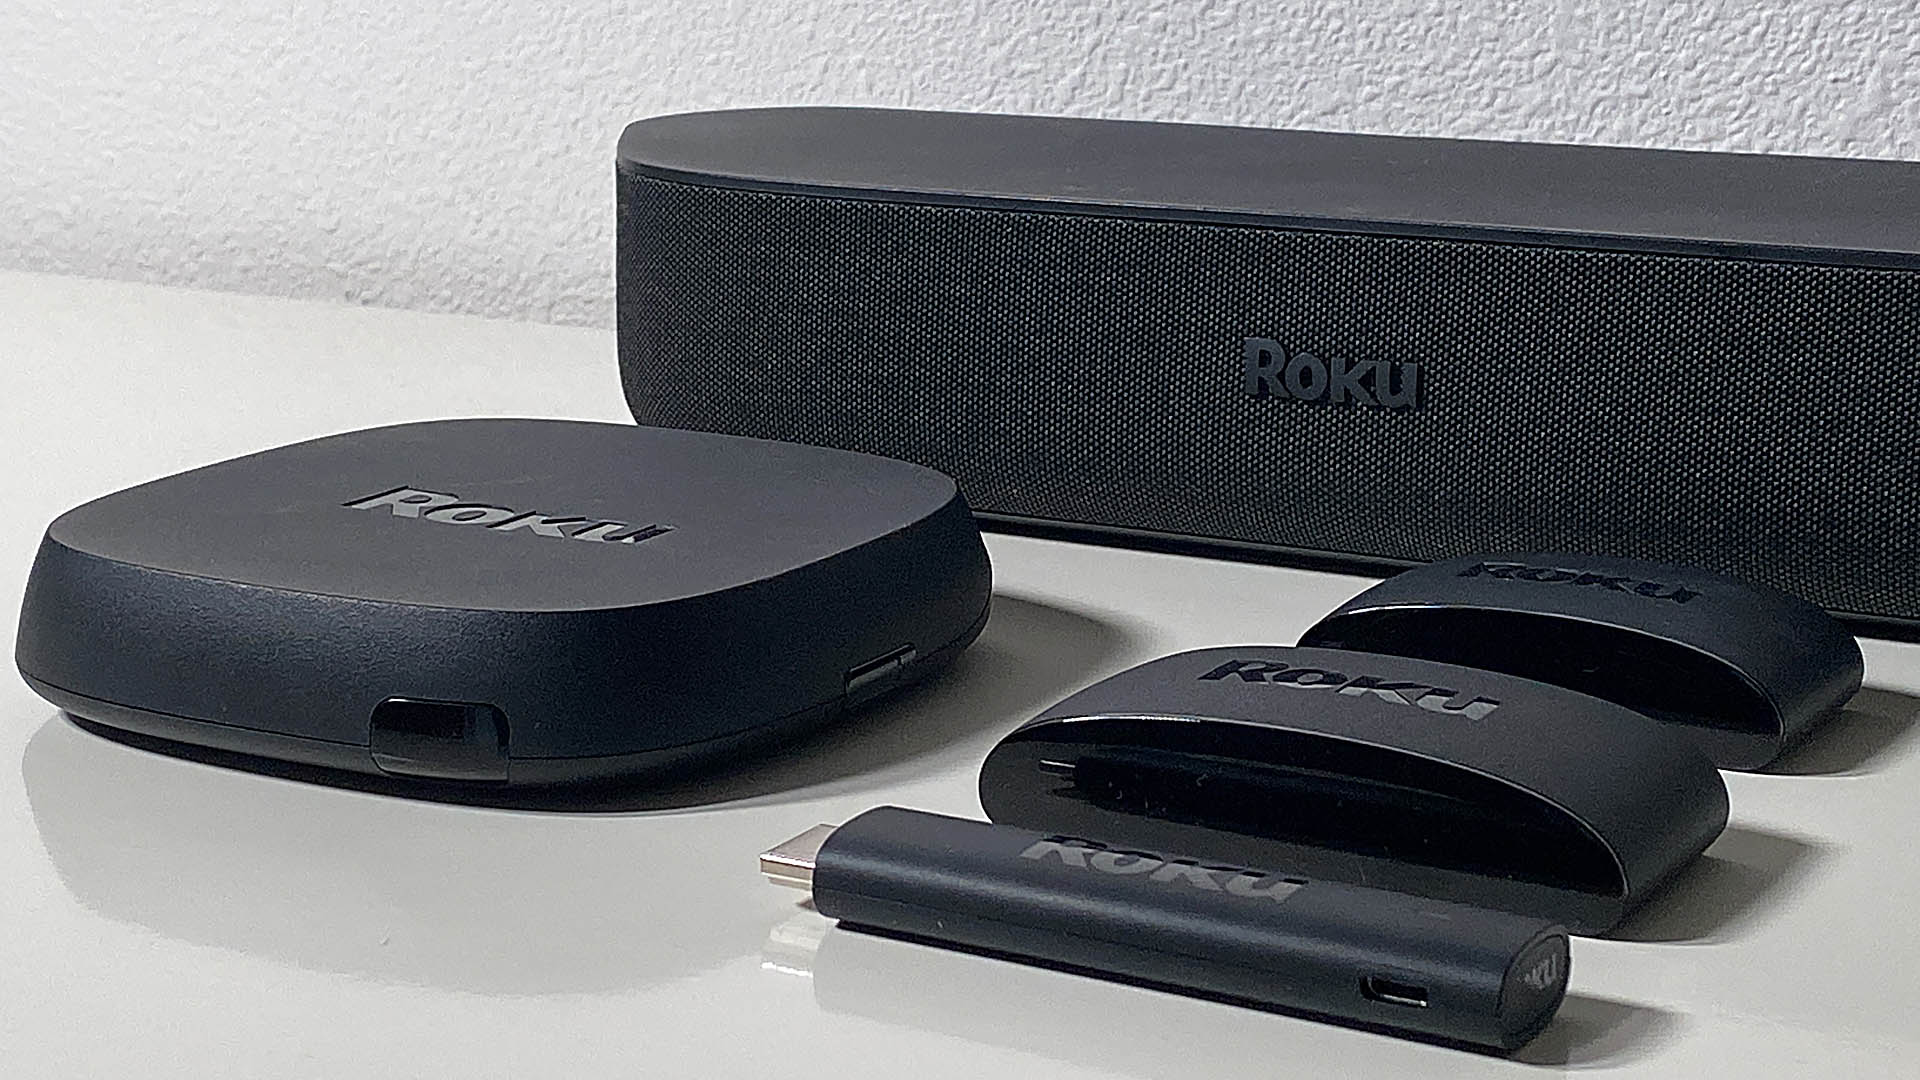 Five of Roku's current streaming devices